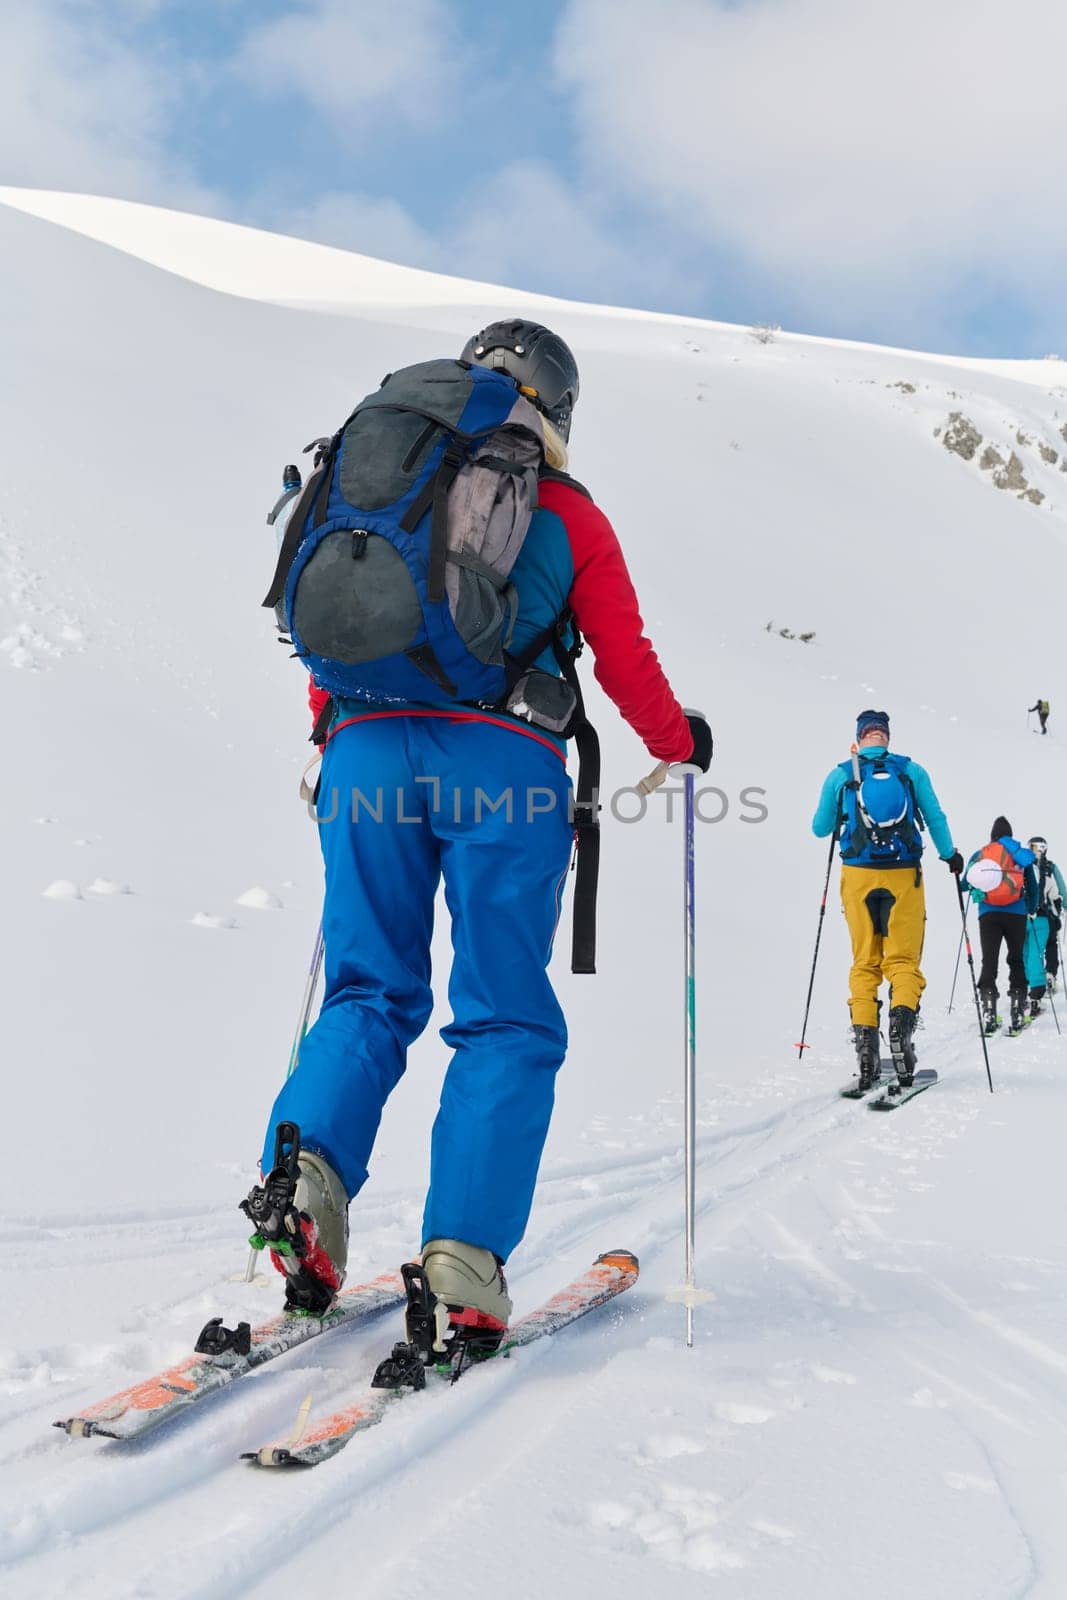 Pushing Limits on High: A Team of Experts Conquers the Backcountry by dotshock